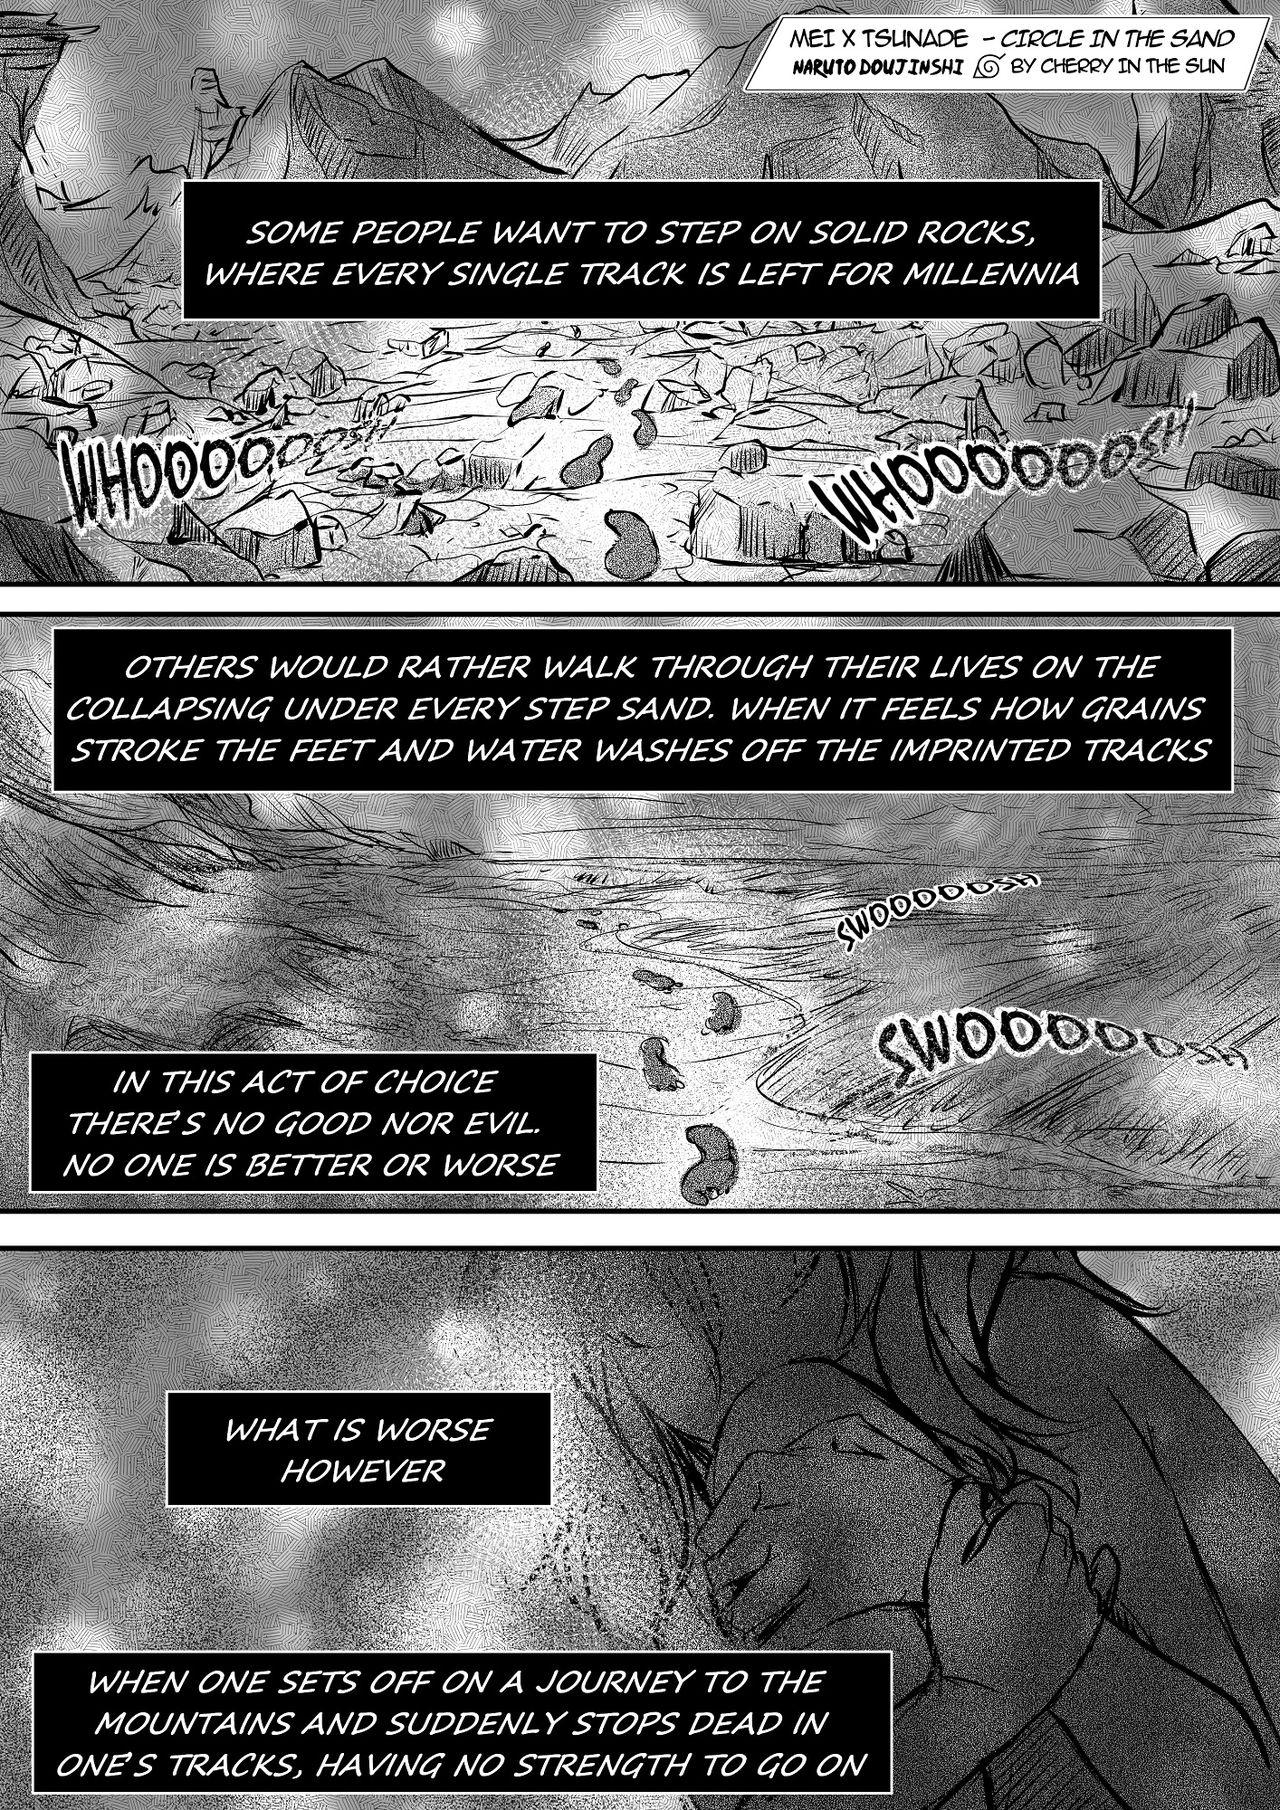 Rope Circle in the Sand - Naruto Buttplug - Page 2